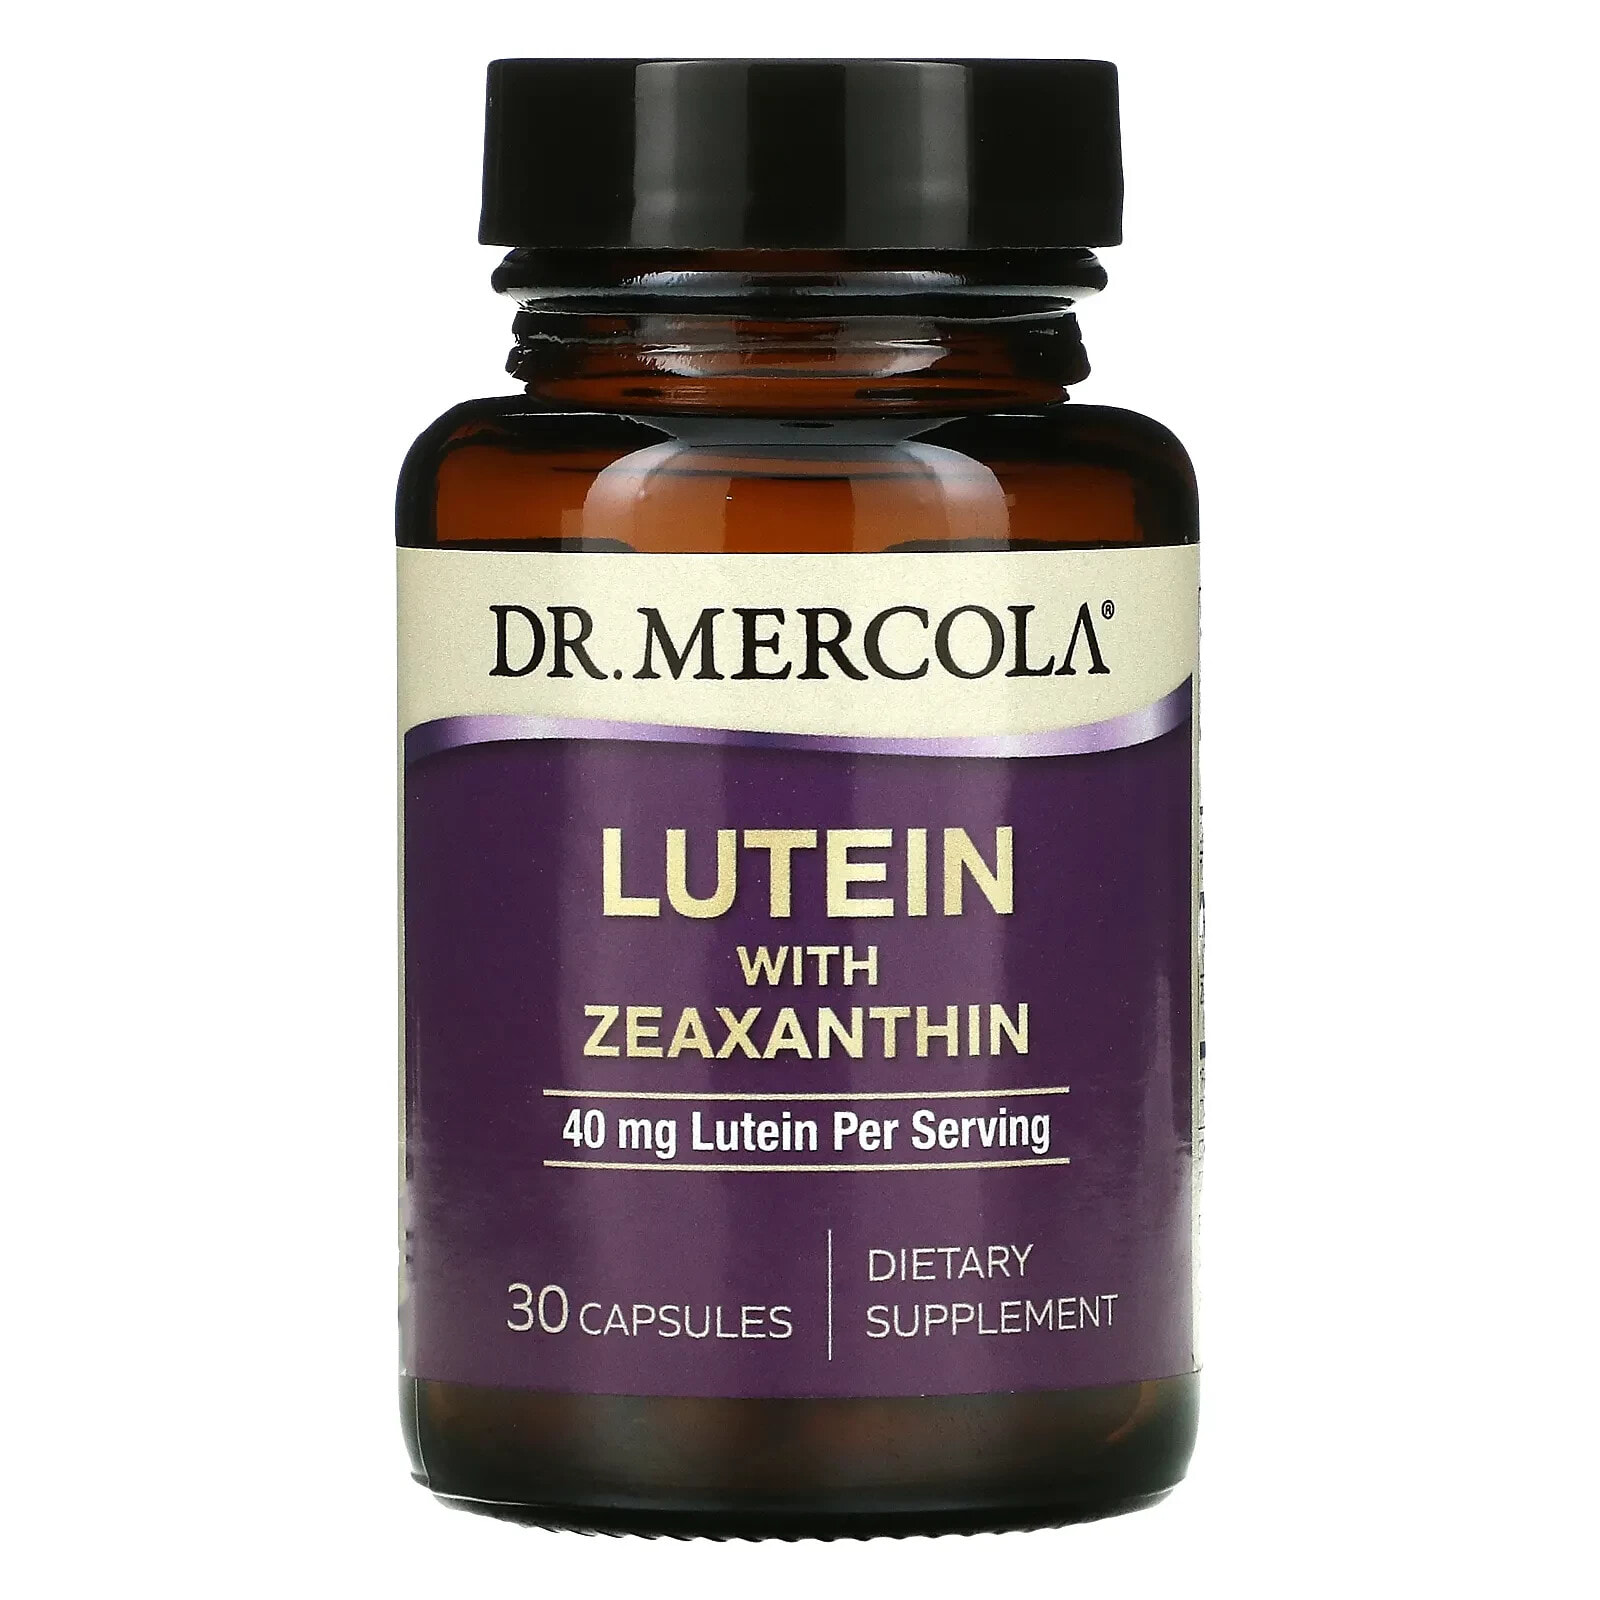 Lutein with Zeaxanthin, 40 mg, 30 Capsules